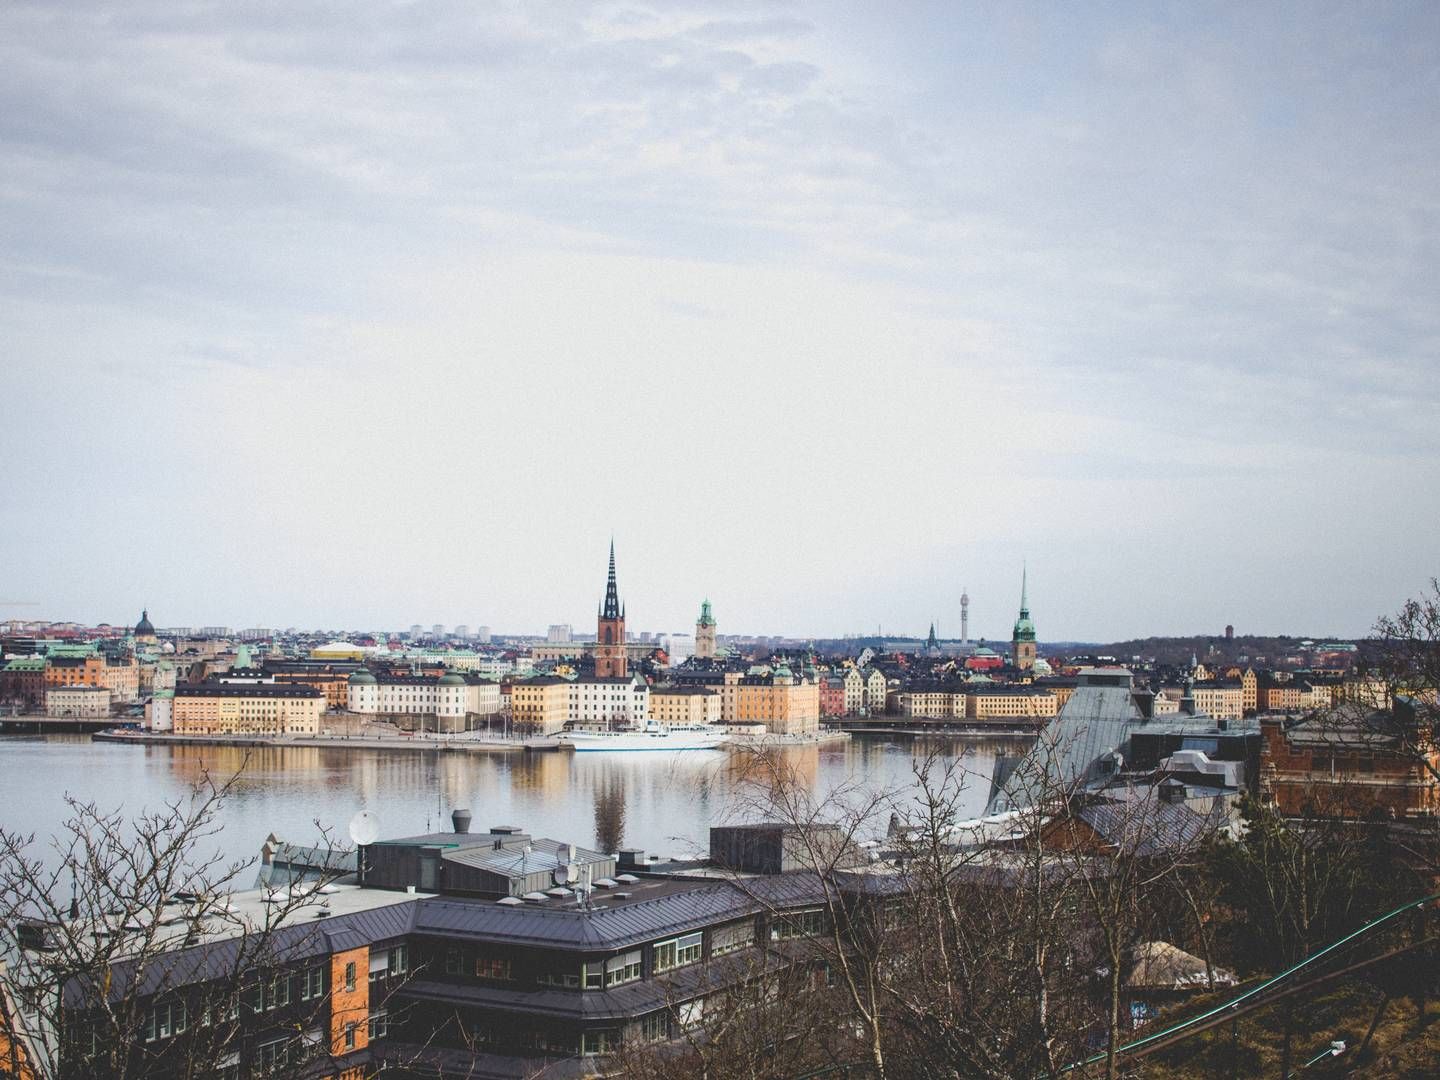 Savills Investment Management's new Head of Client Capital, Nordics will be based in Stockholm.